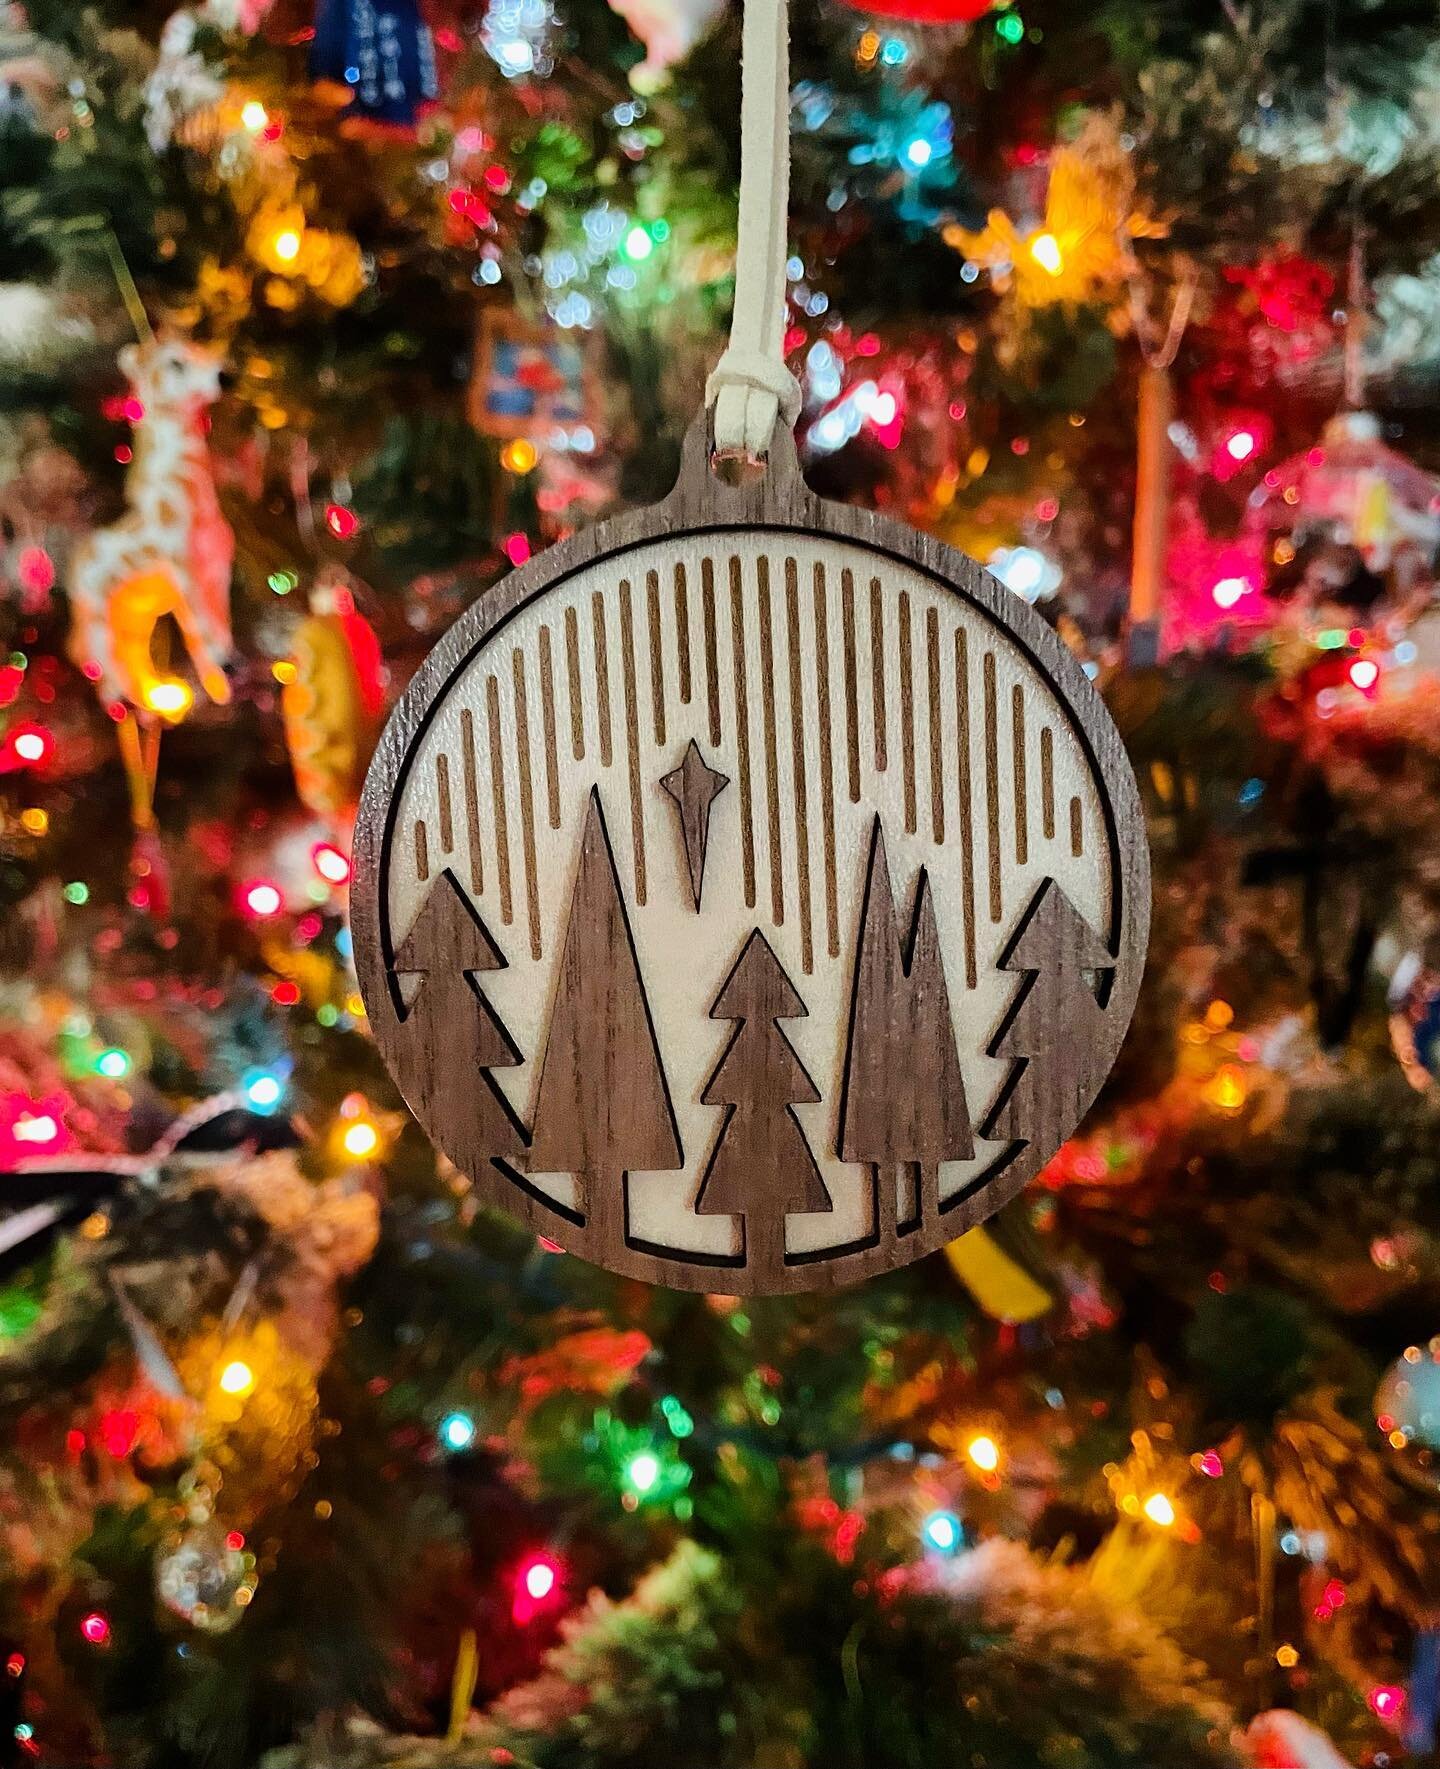 New holiday ornaments! A great addition to a package and then onto the tree 🎄 available this Saturday at our pop up @forgottenstarbrewing from 1-7 pm - see you there! 
.
.
. 
#shopsmall #shoplocal #mnmade 
#minnesotamaker #northernlightsdesign #smal